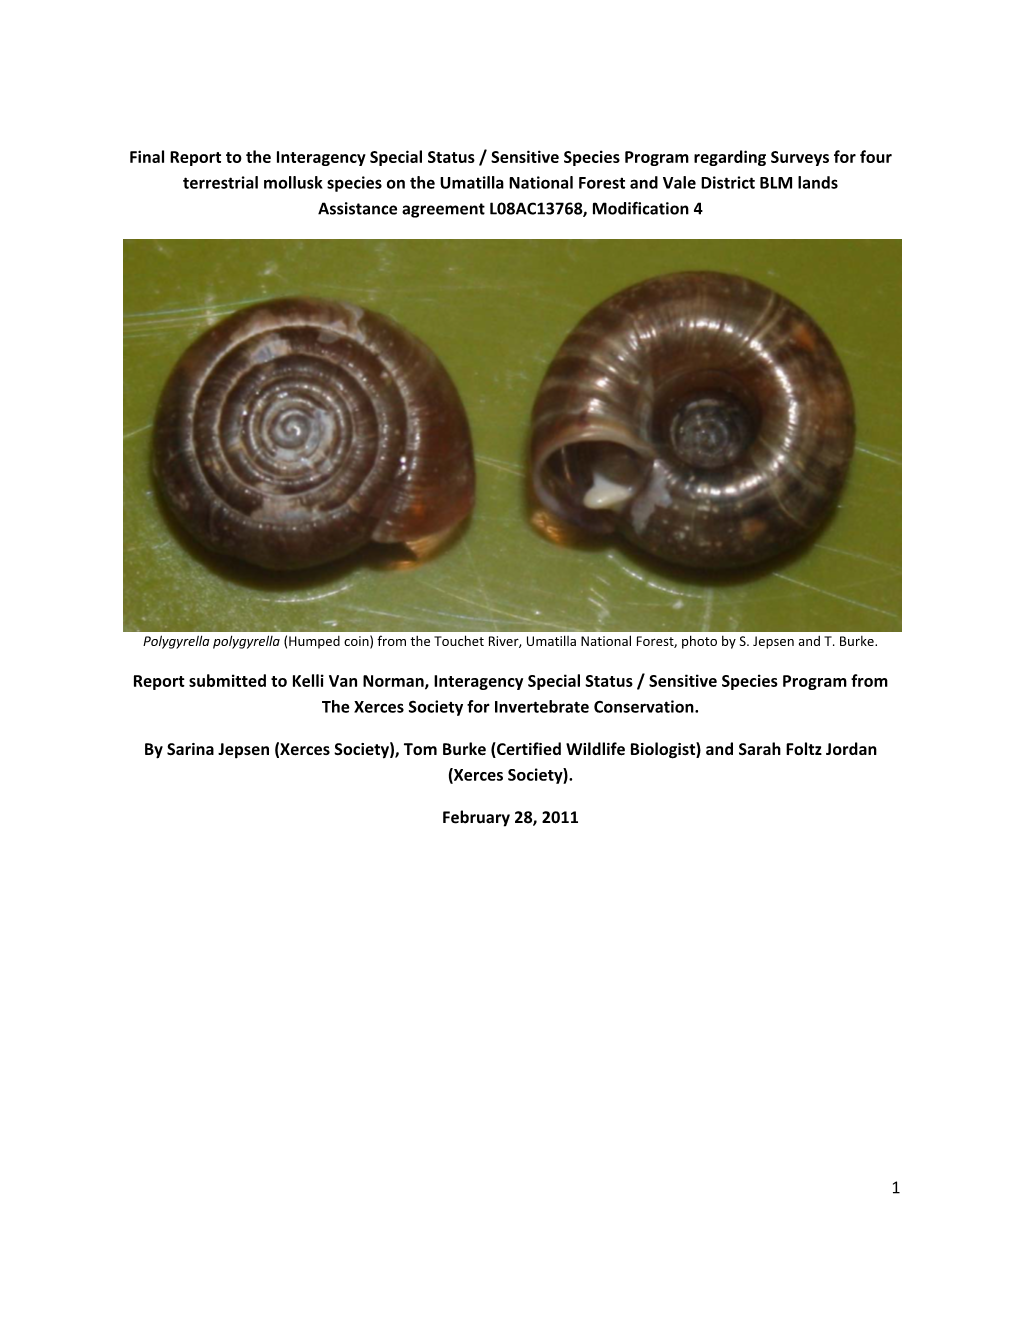 Surveys for Four Terrestrial Mollusk Species on the Umatilla NF And